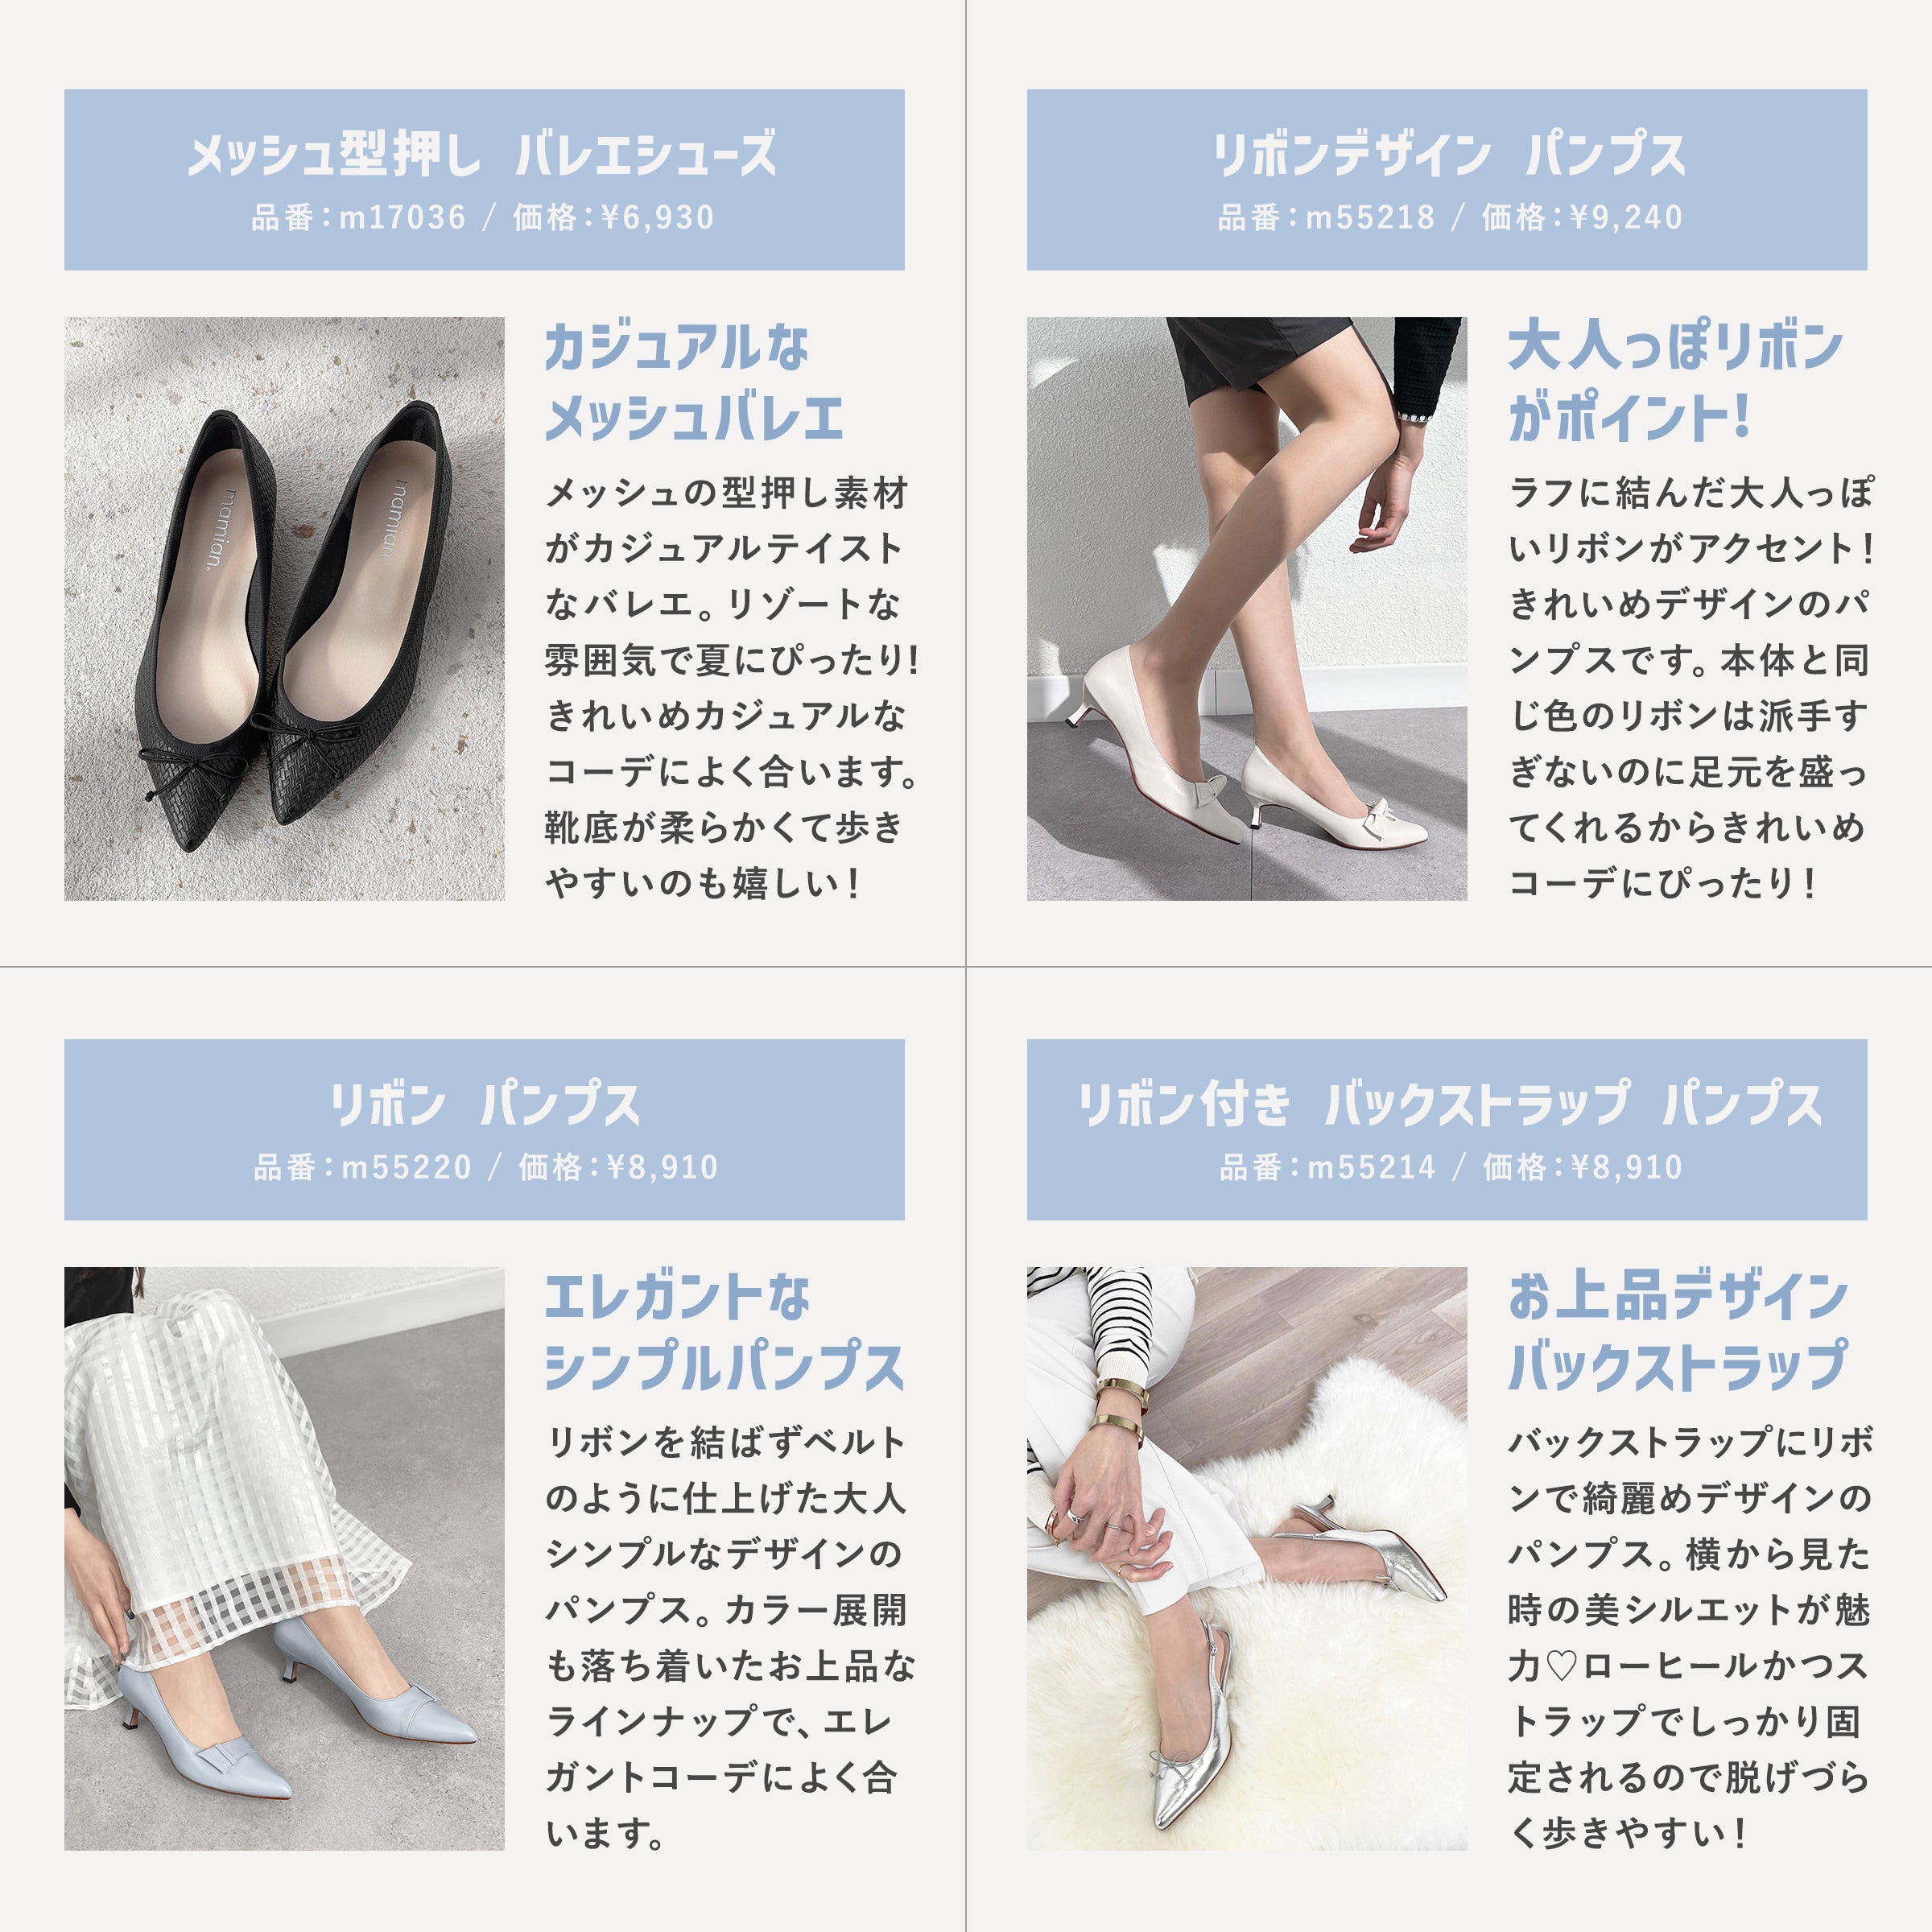 Special feature on shoes with cute ribbons for adults